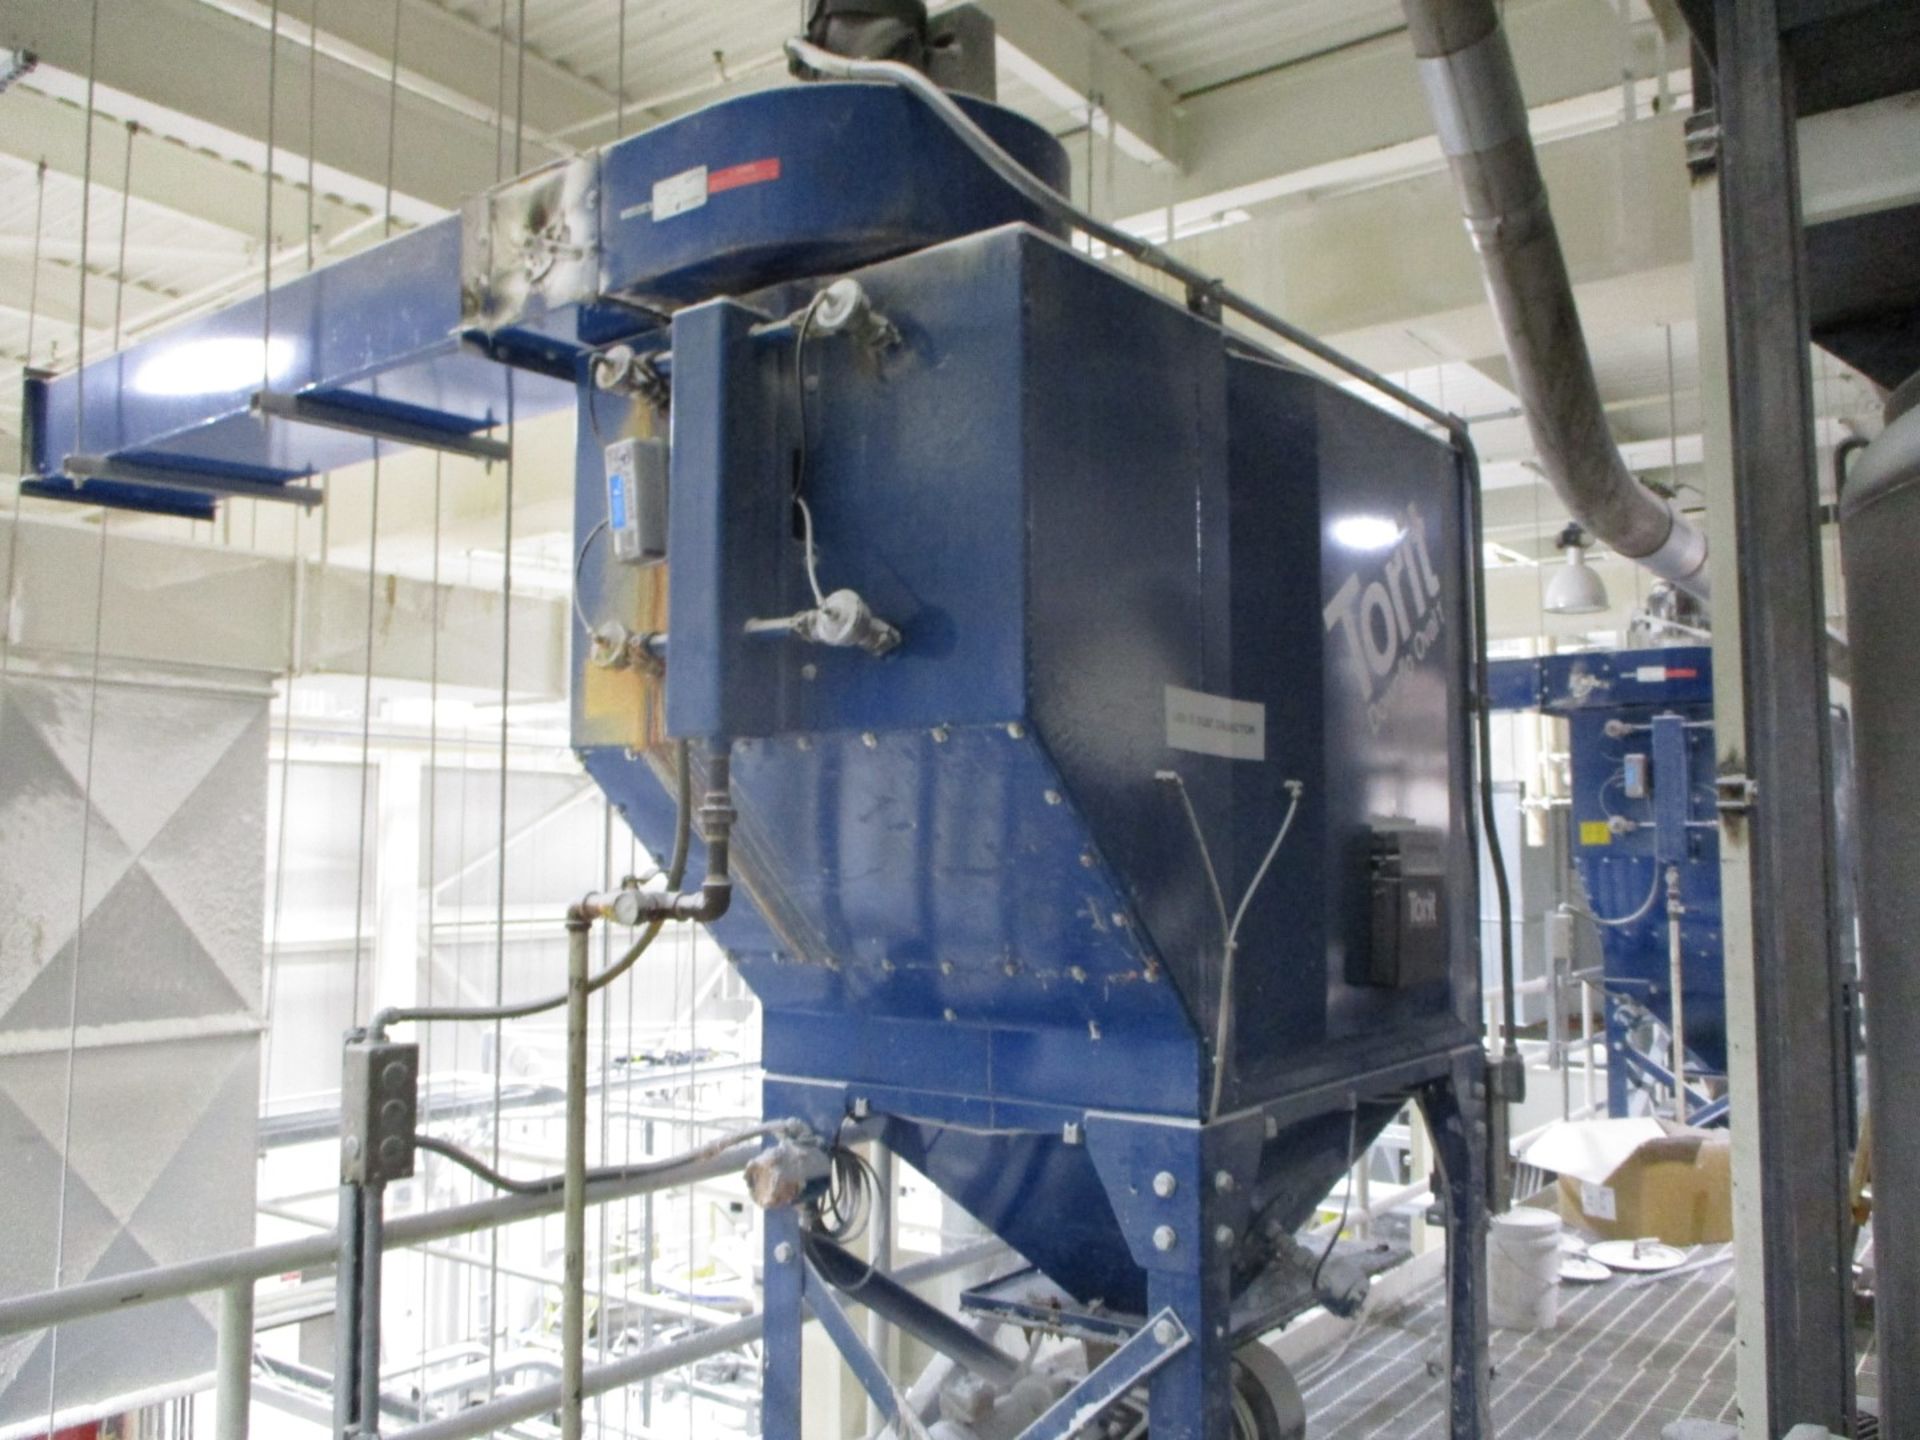 1520 Sq Ft Torit Dust Collector, Model Dfo2-8, With 7.5 Hp Blower, Serial# Ig686002 | Rig Fee $1200 - Image 4 of 6